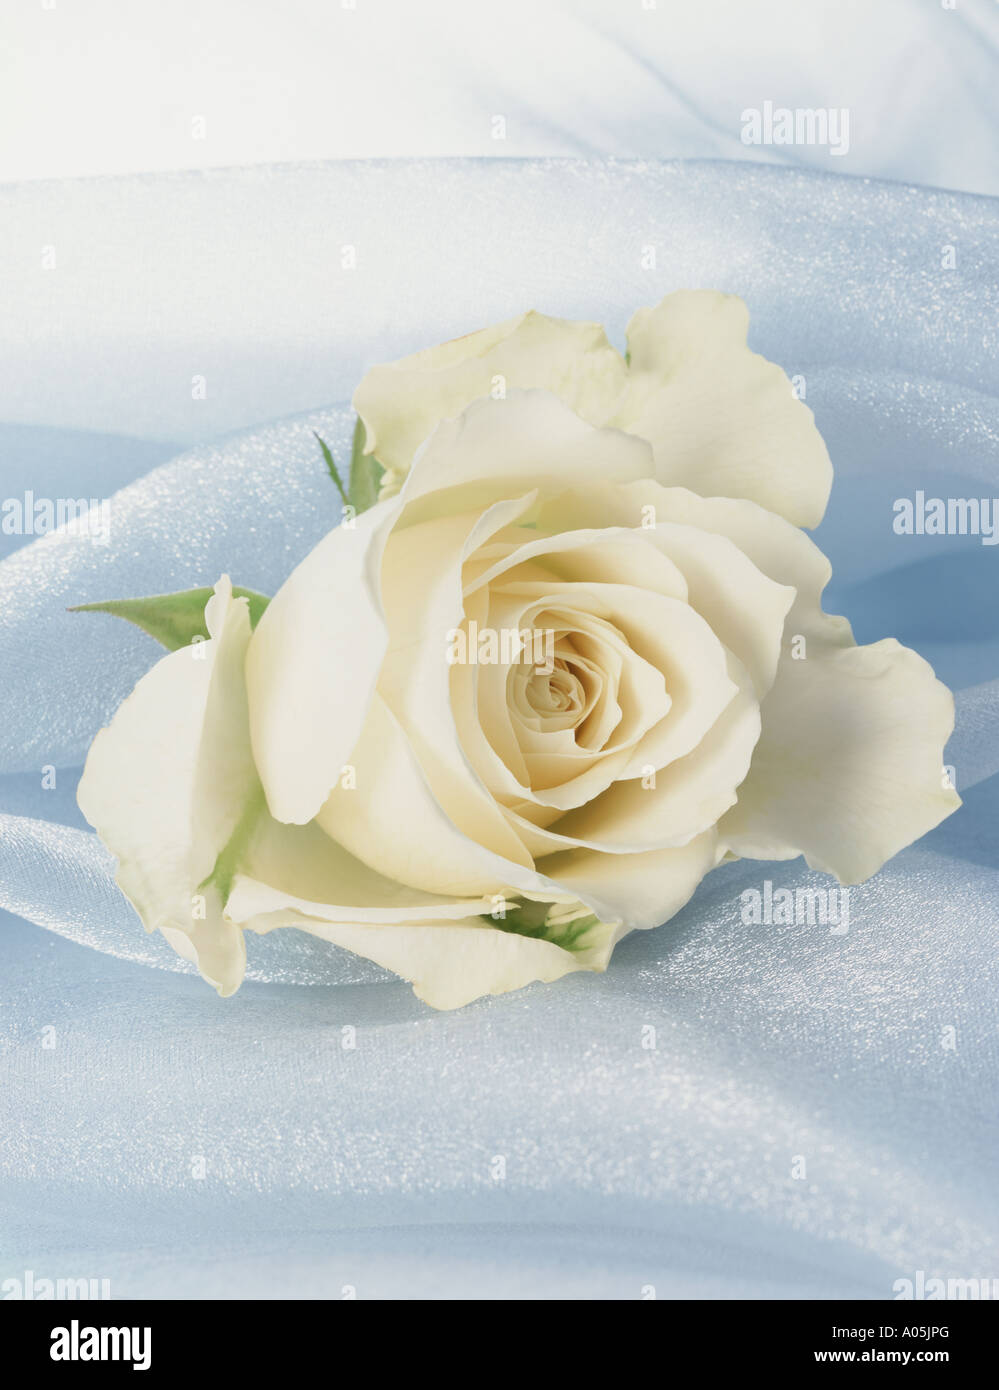 A white Rose on a silk background Stock Photo